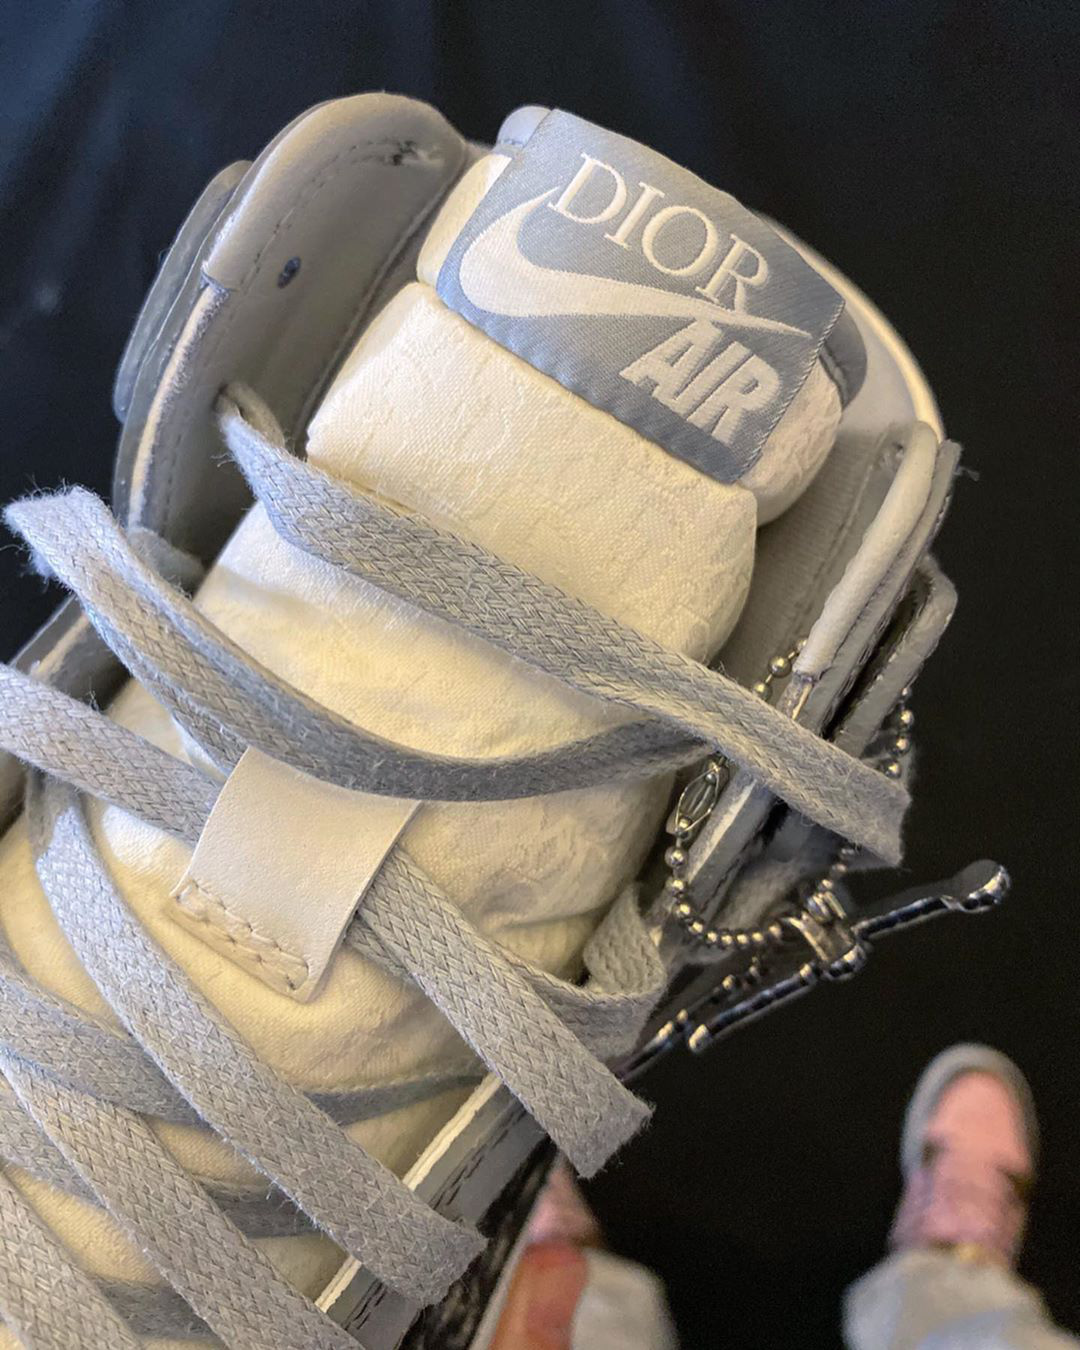 Dior x Nike Air Jordan 1 sneakers loved by Kylie Jenner and reselling for  US20000 already are the worlds smartest investment  thanks to  millennial FOMO  South China Morning Post